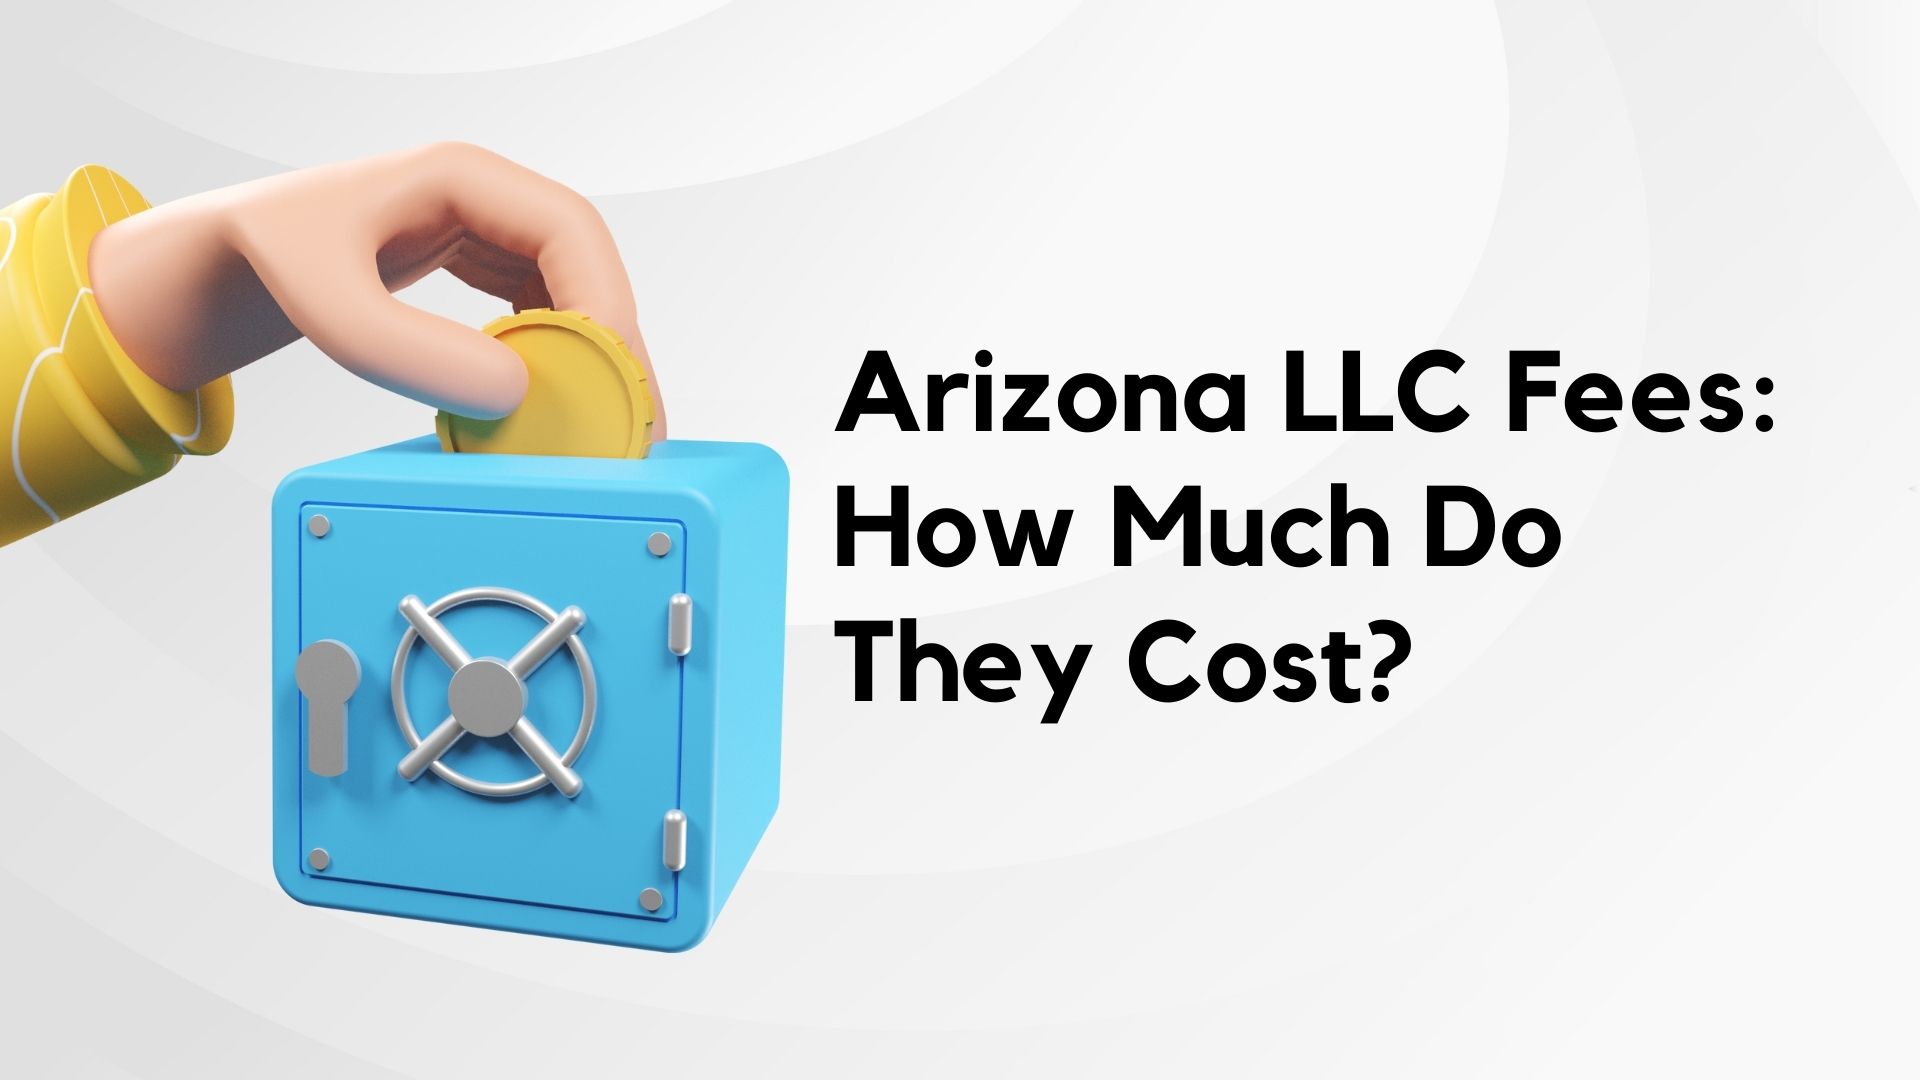 Arizona LLC Fees: How Much Do They Cost?